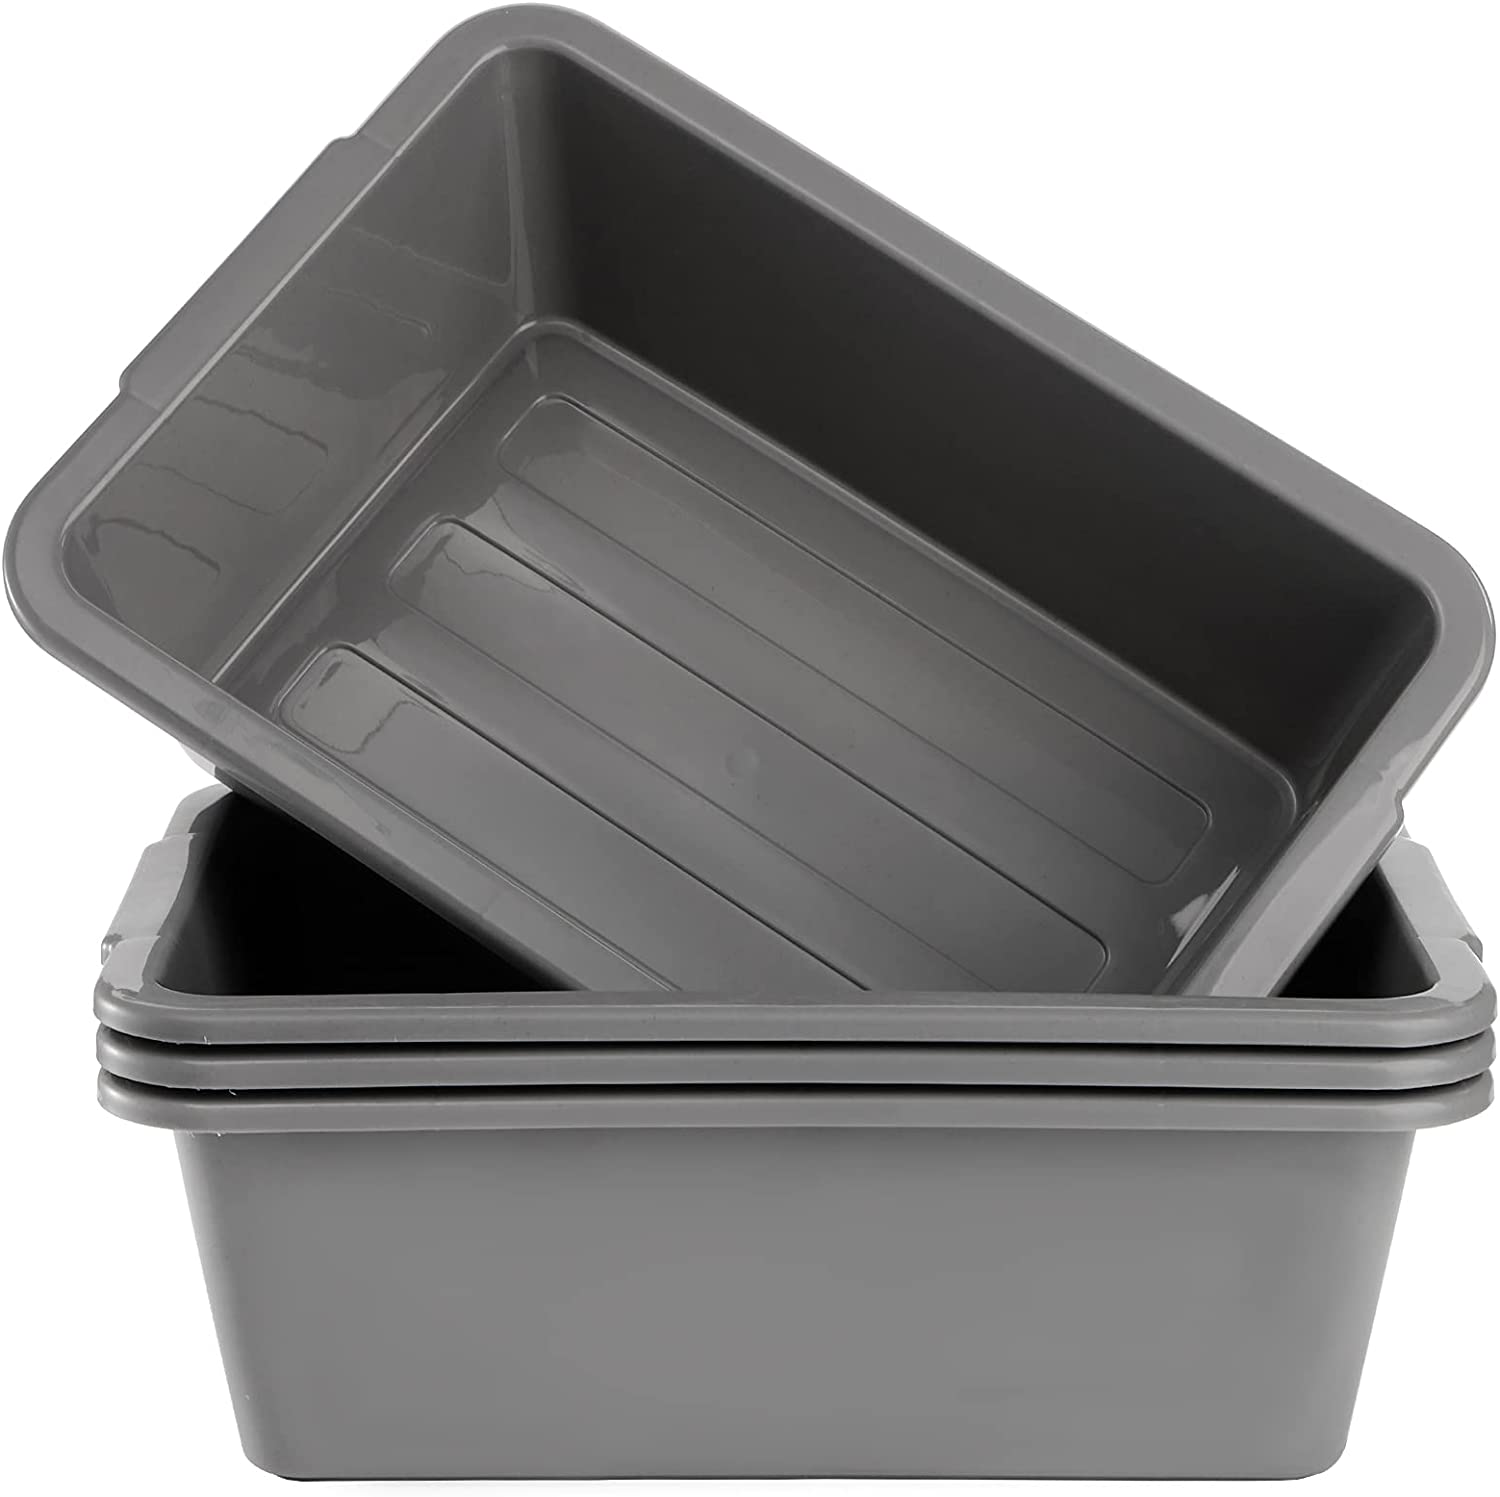 Dicunoy 4 Pack Plastic Bus Tubs, 8L Dish Tubs Food Service Tub, Rectangle Wash Dish Basin Pans, Small Meat Lugs, Concrete Cement Mixing Tray, Commercial Tote Box for Home, RV, Camping